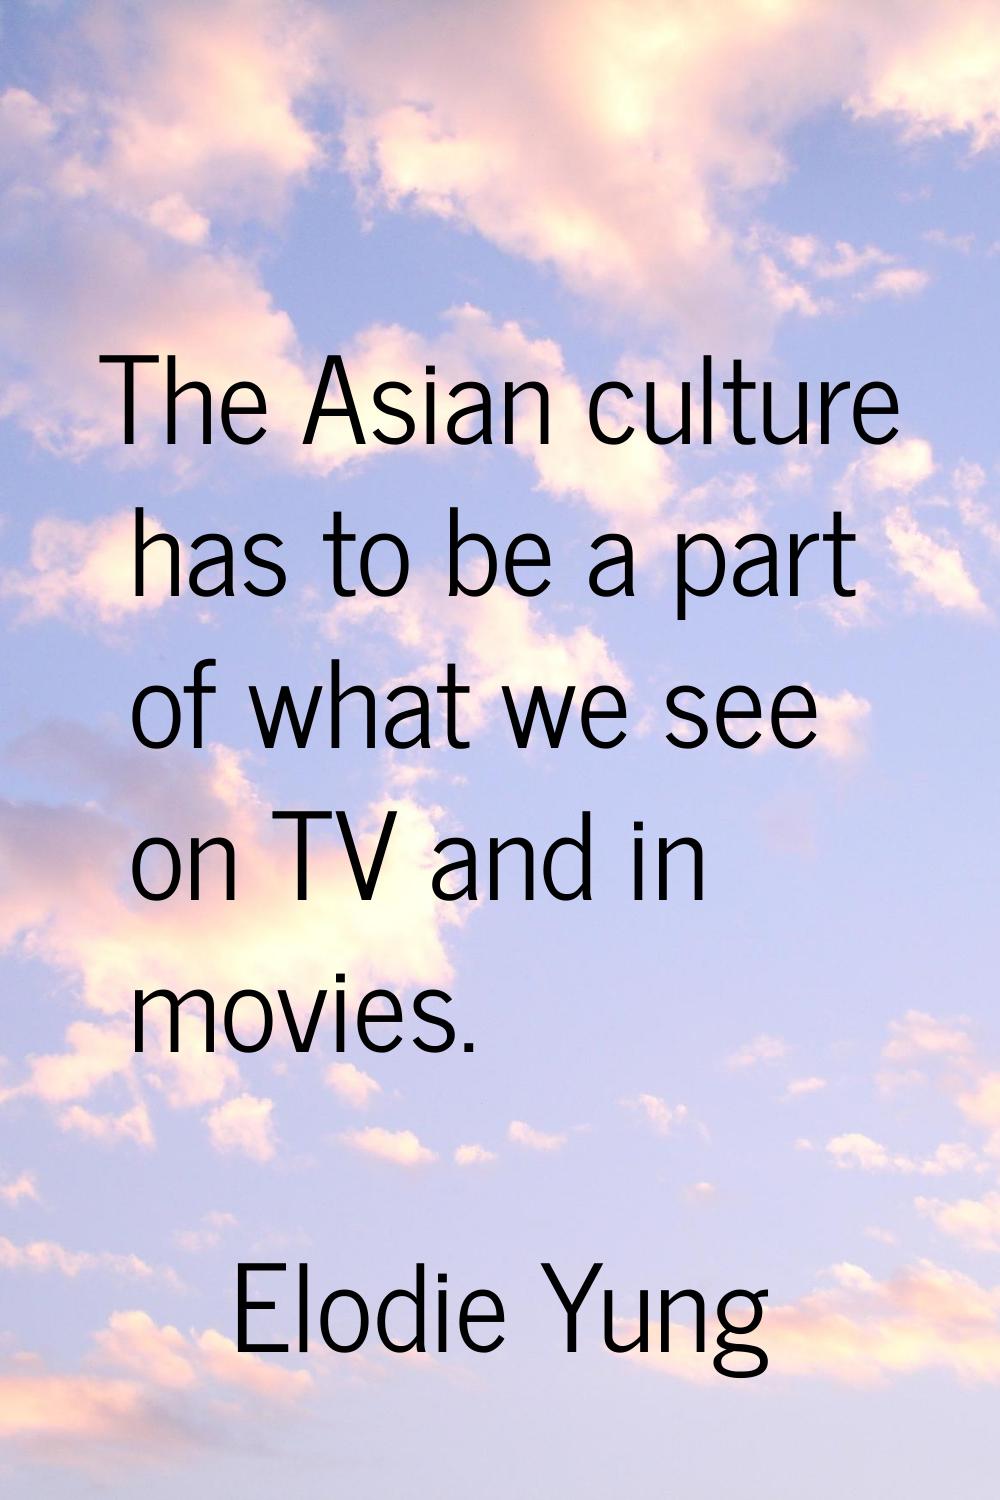 The Asian culture has to be a part of what we see on TV and in movies.